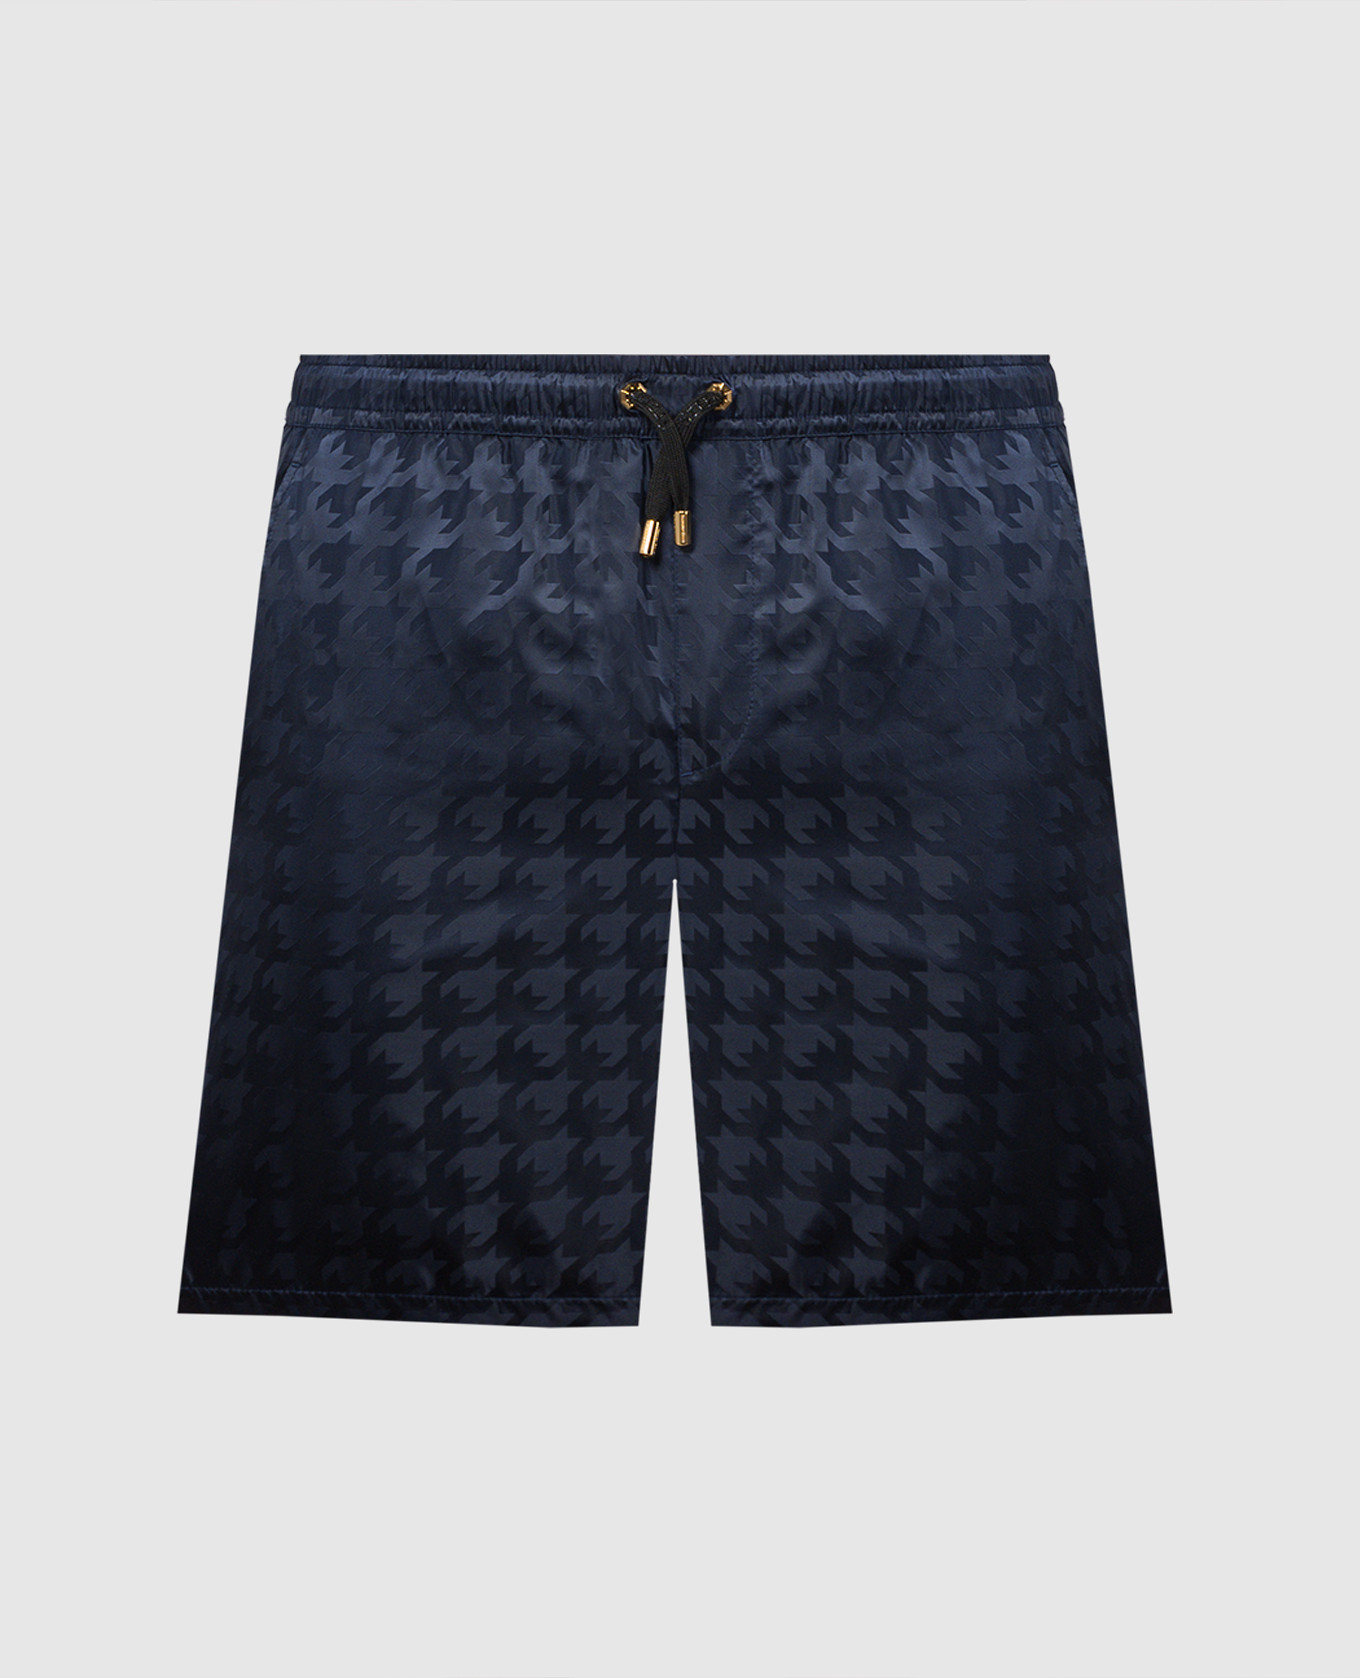 Blue patterned swimming shorts